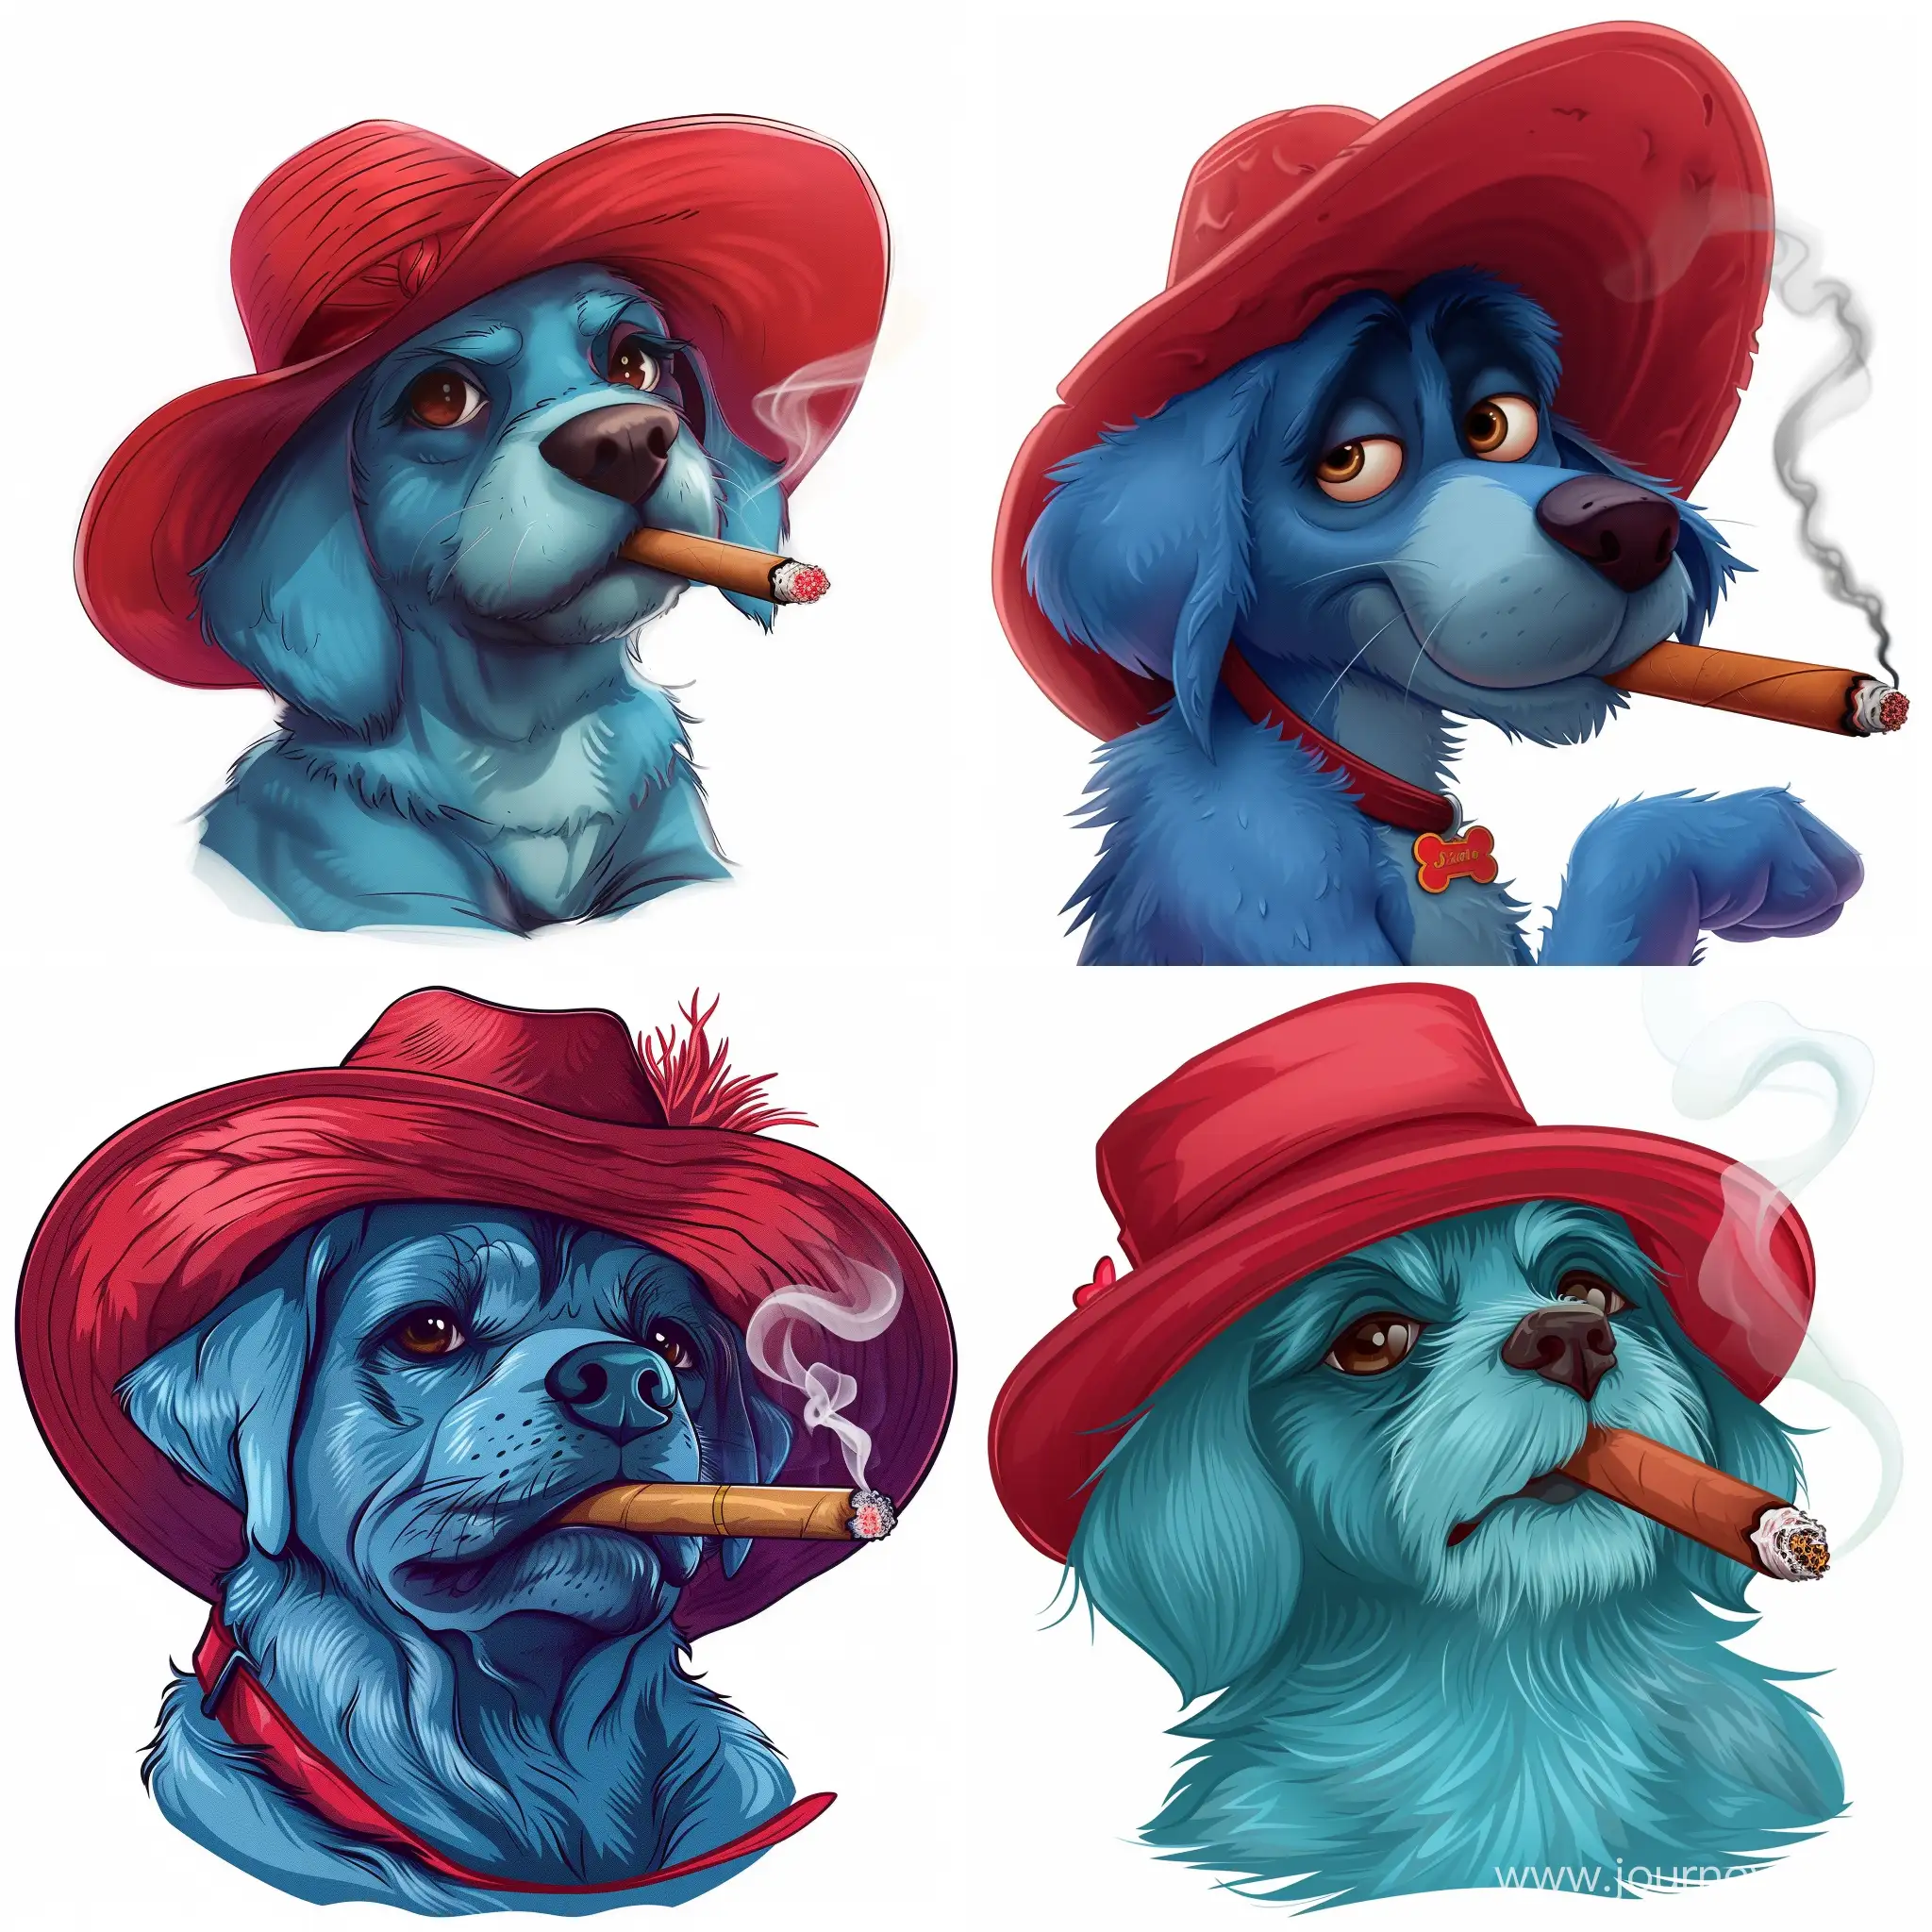 Blue dog smoking a cigar in a red hat, animation style, white background